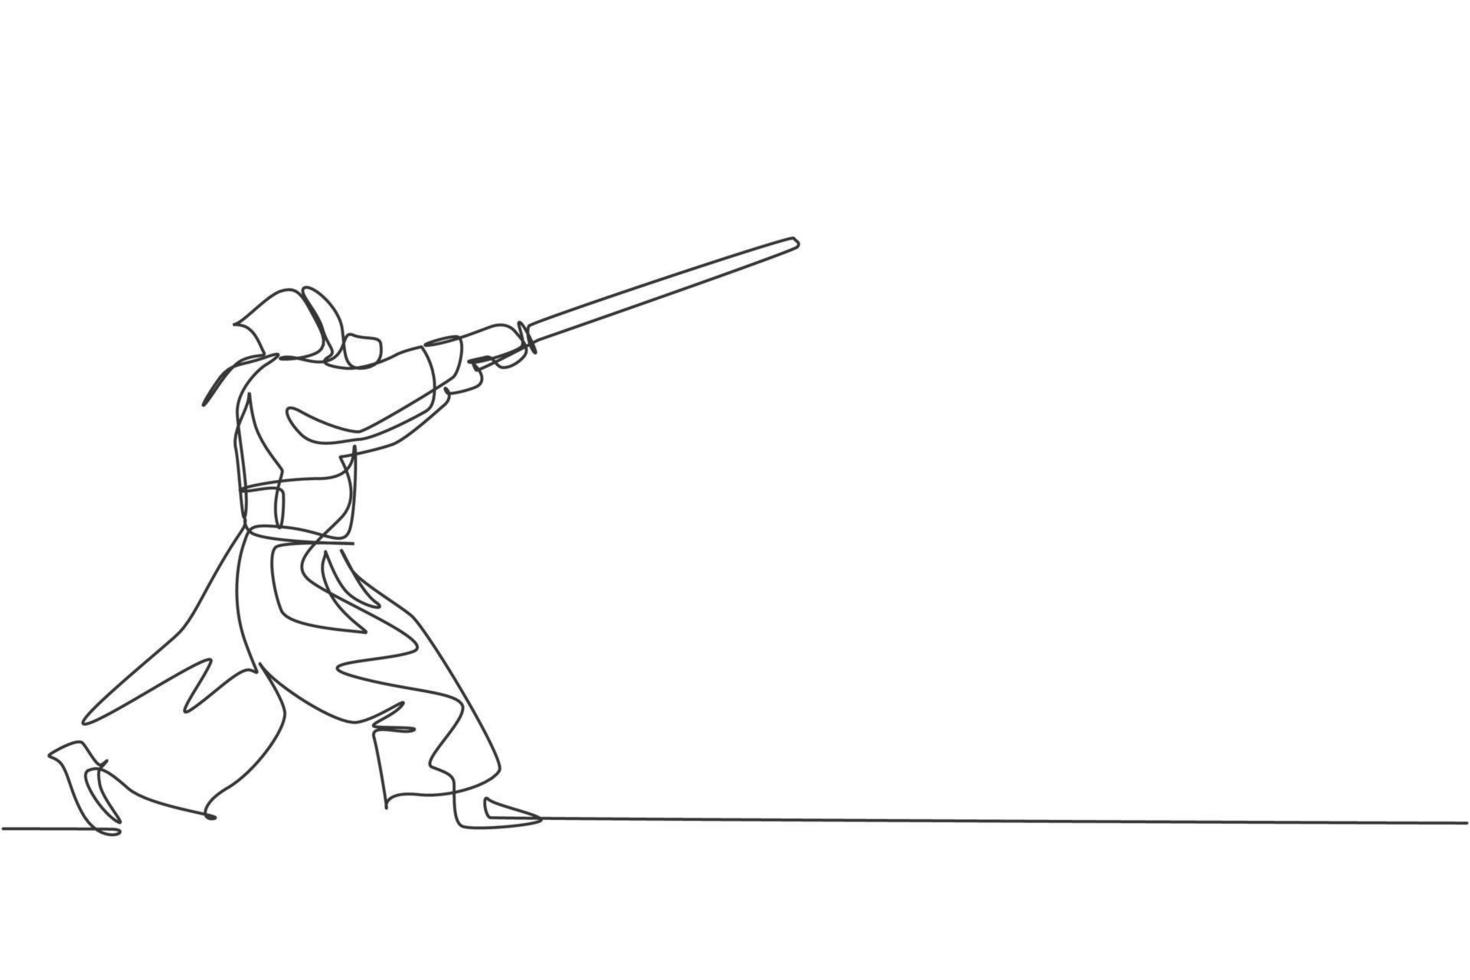 One single line drawing of young energetic man exercise attack kendo move with wooden sword at gym center vector graphic illustration. Combative fight sport concept. Modern continuous line draw design